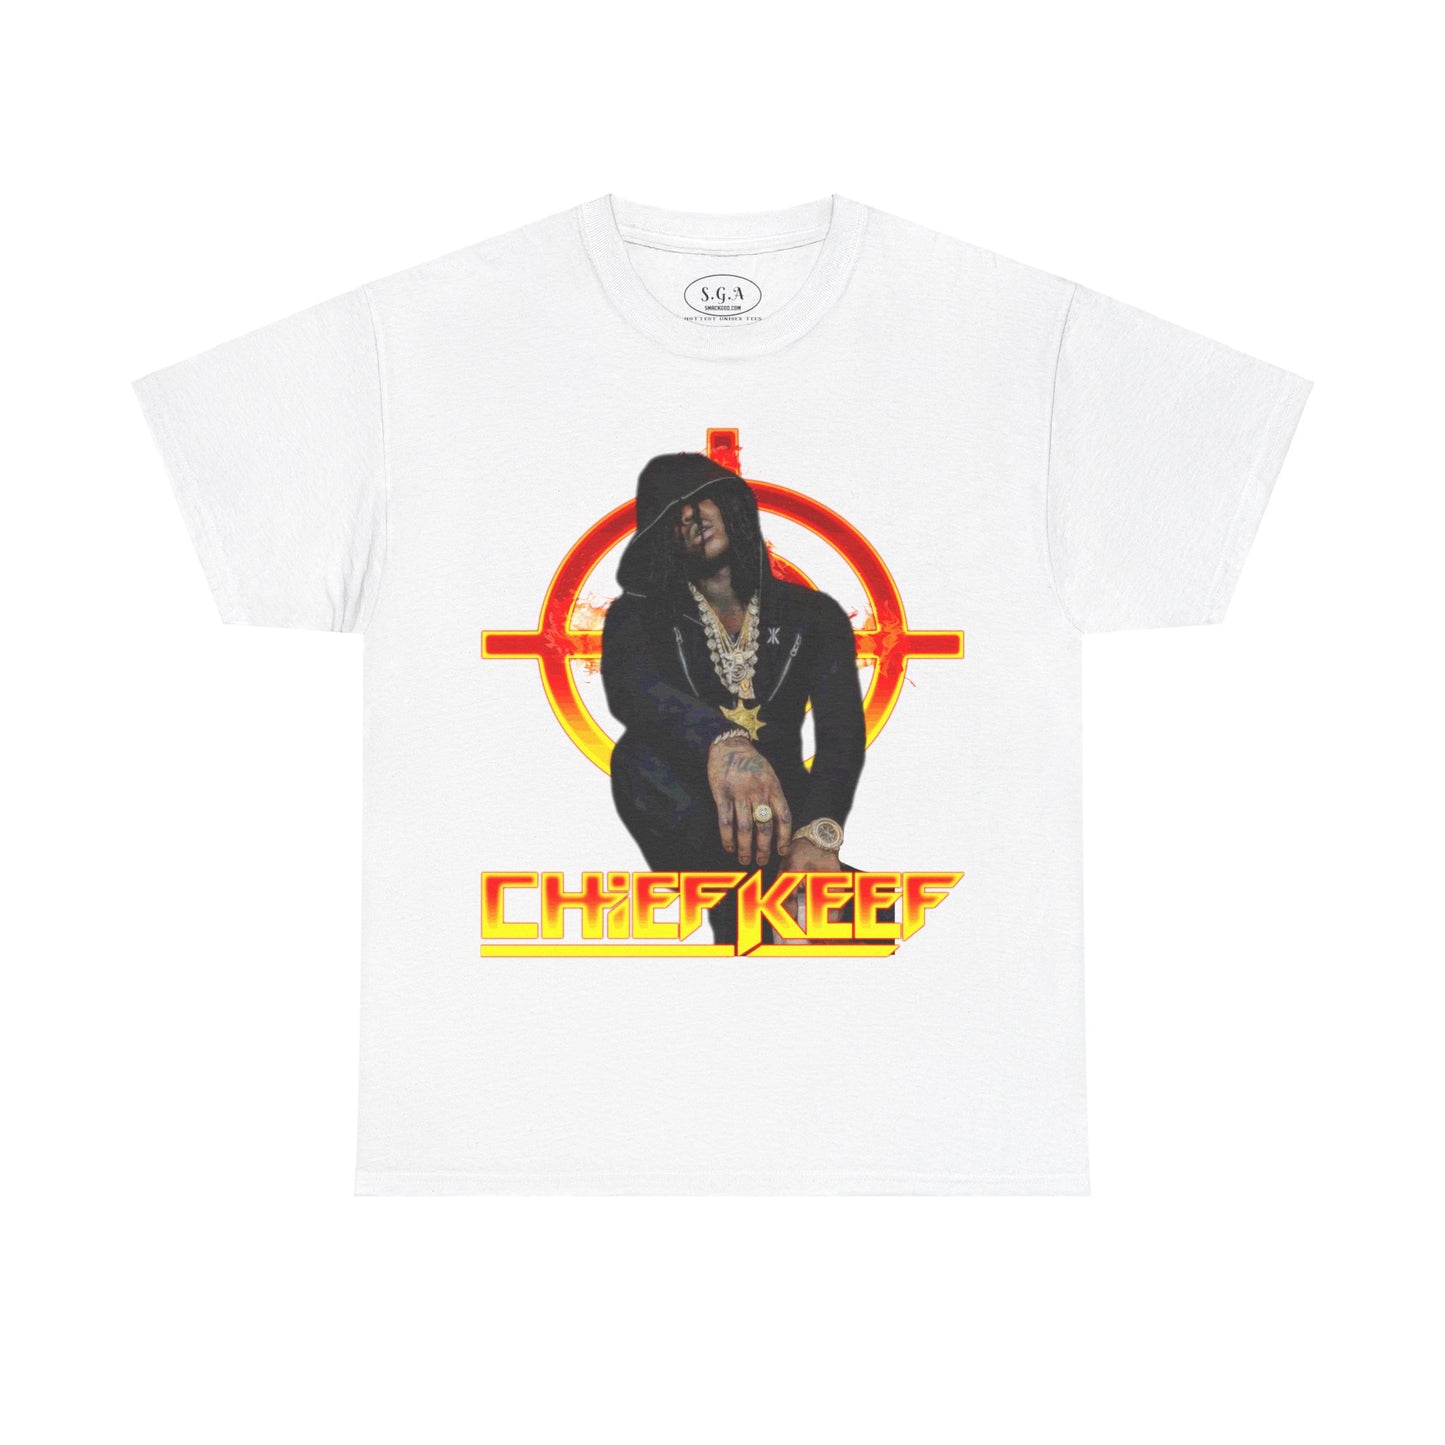 Chief Keef T Shirt